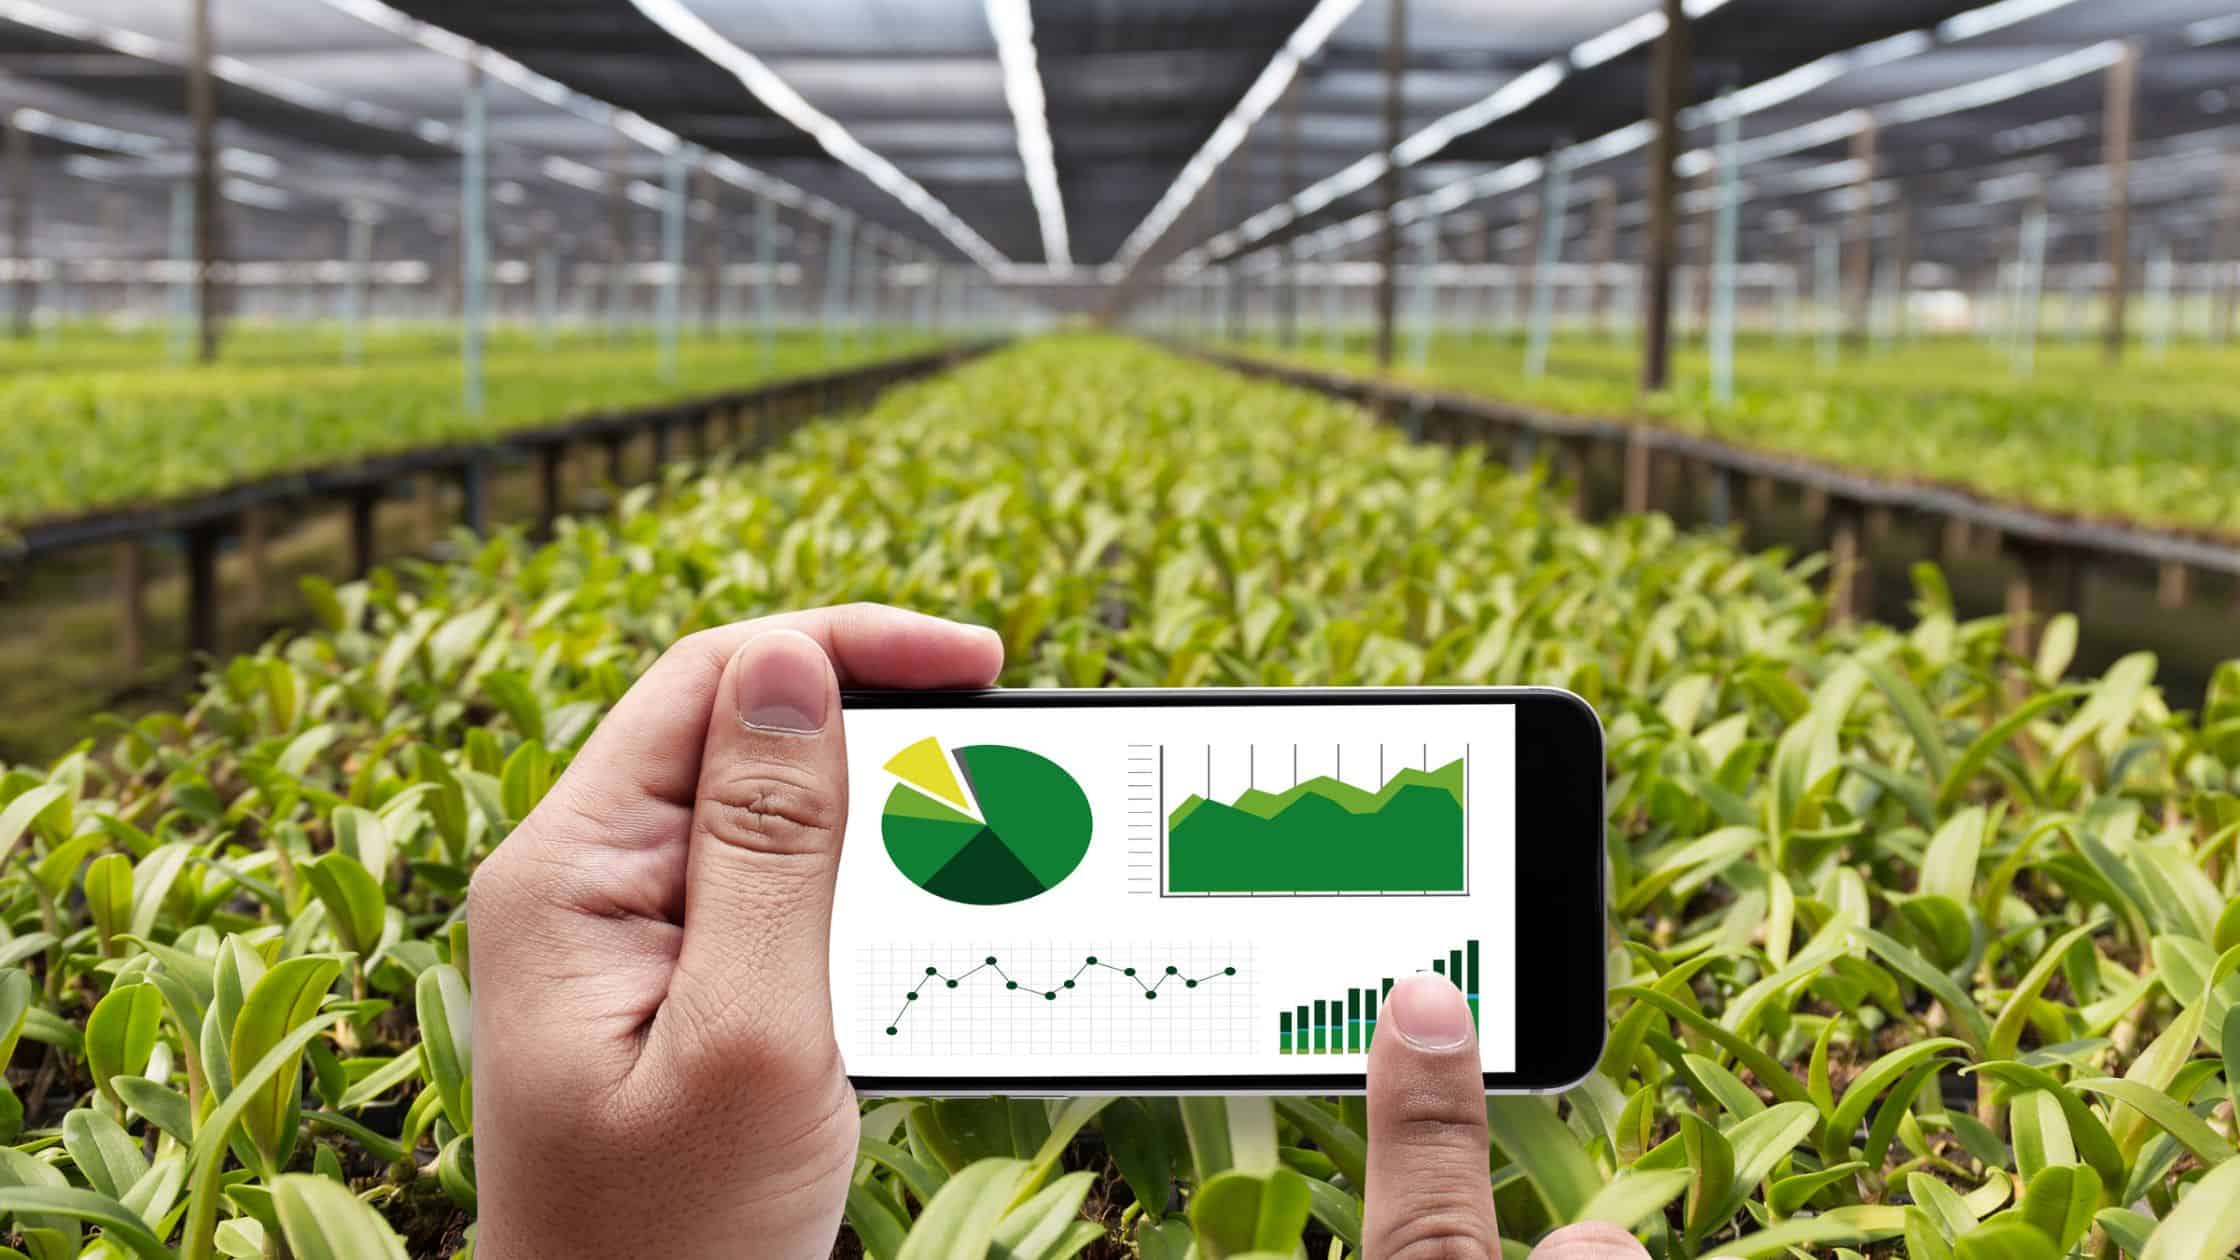 Computer Vision in Agriculture